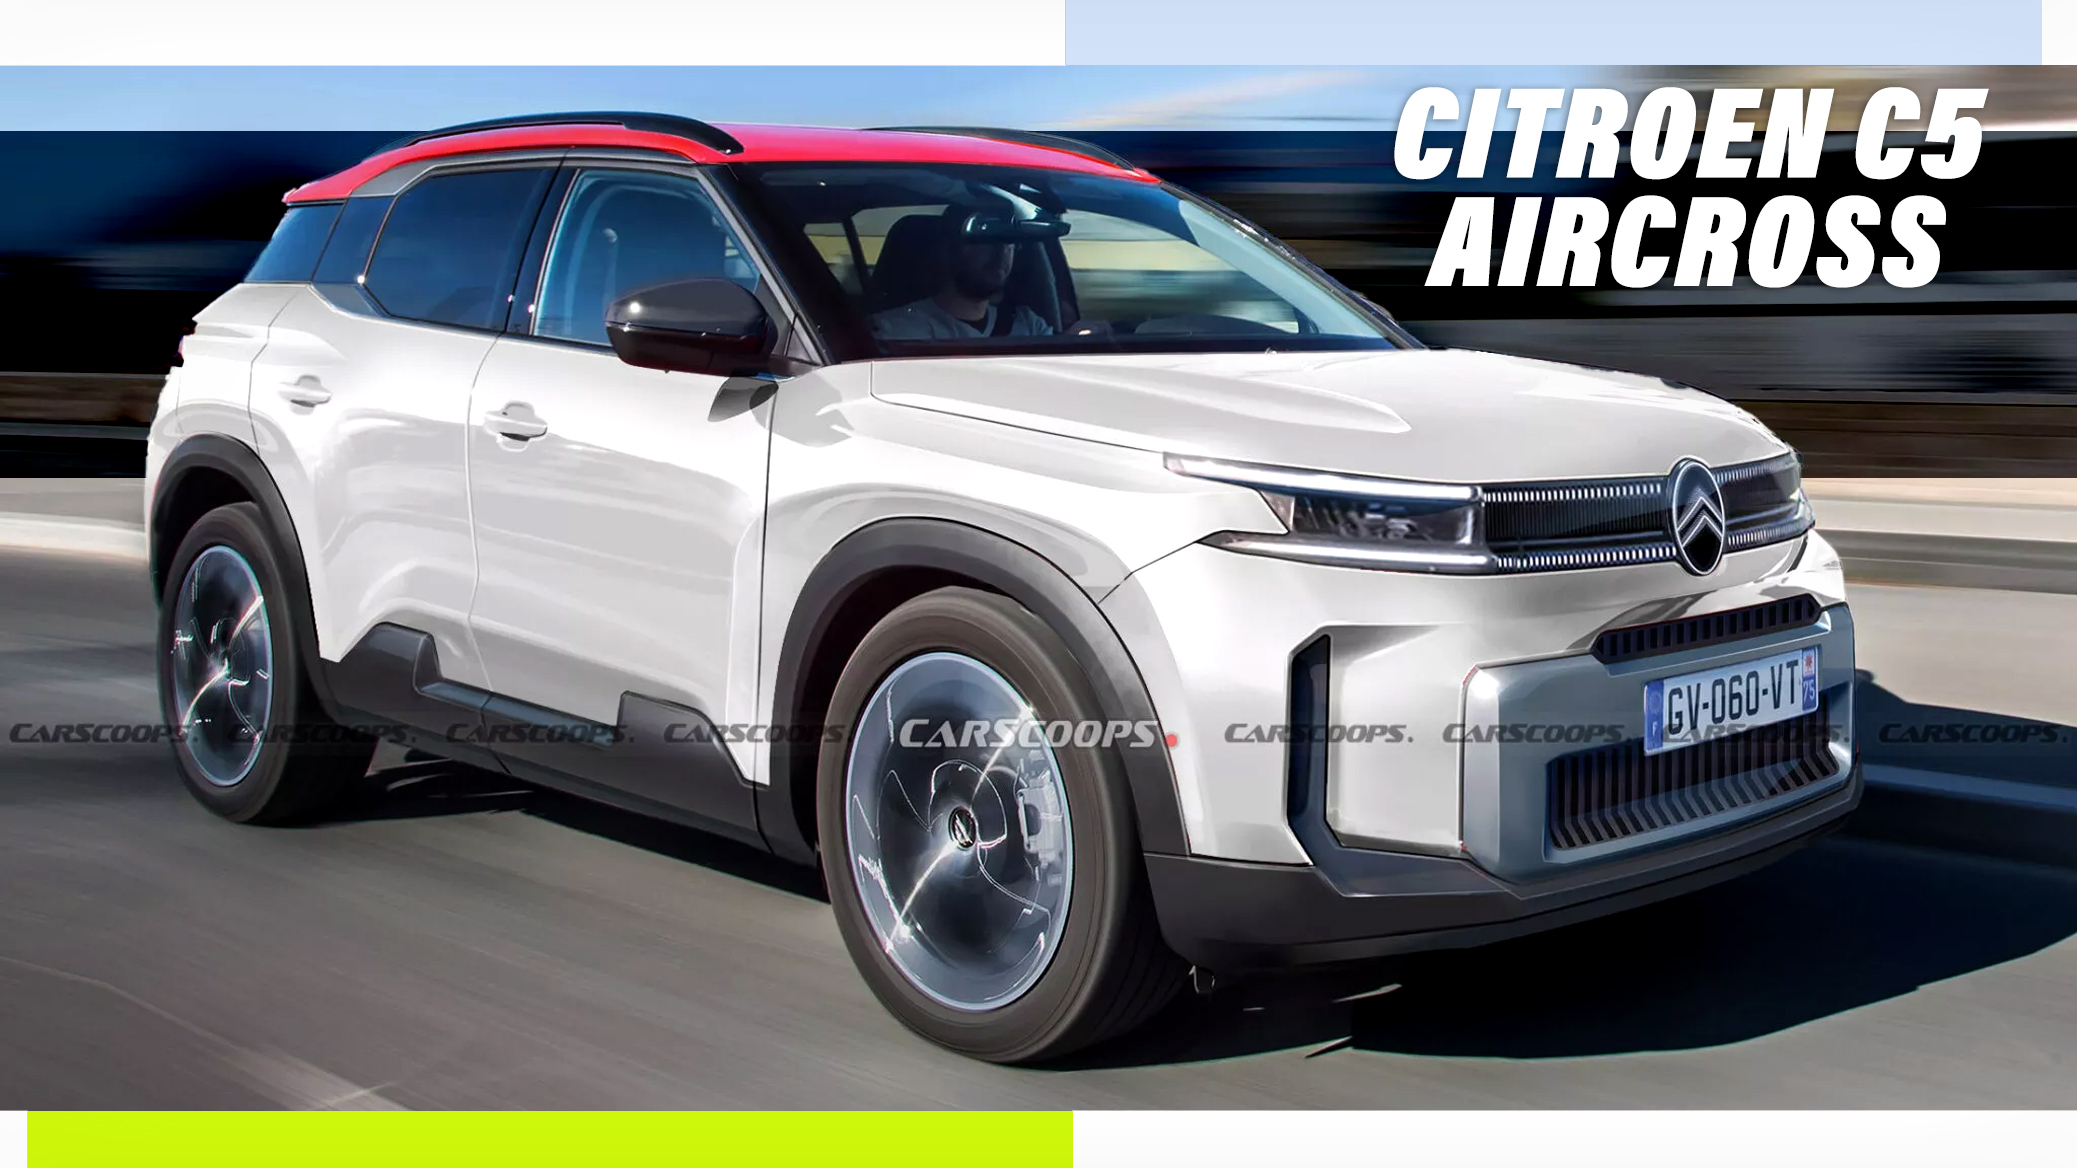 You May Soon Be Able to Drive a New Citroën in the U.S.